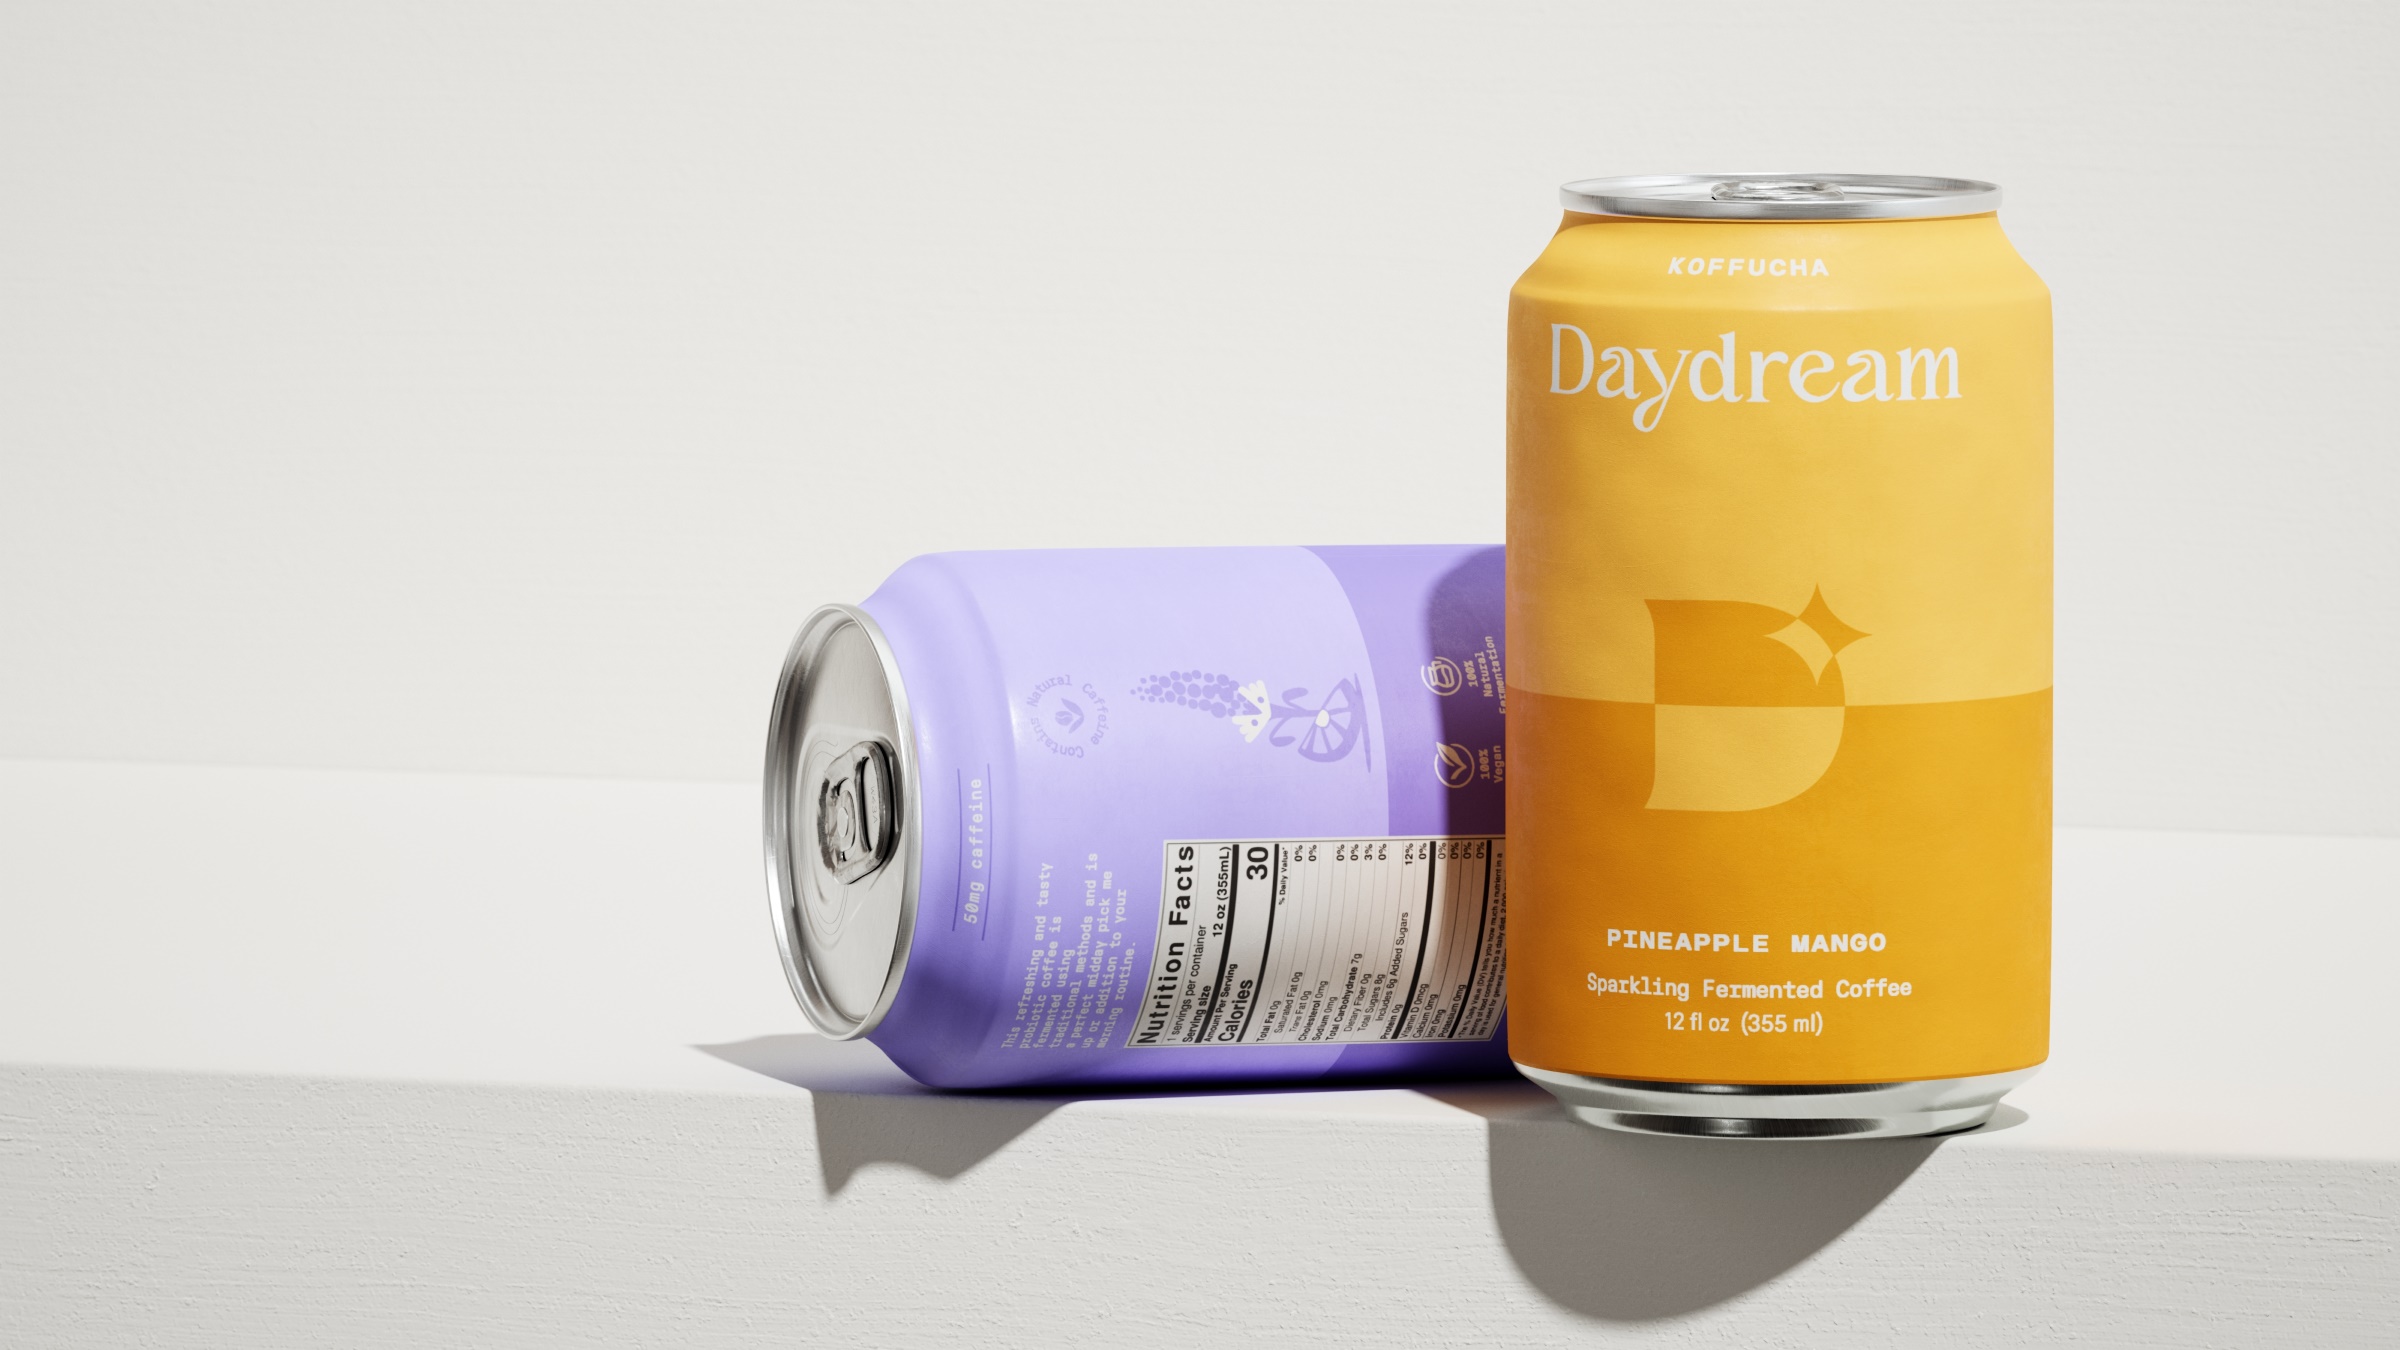 Visual Identity and Packaging Design for Daydream Koffucha